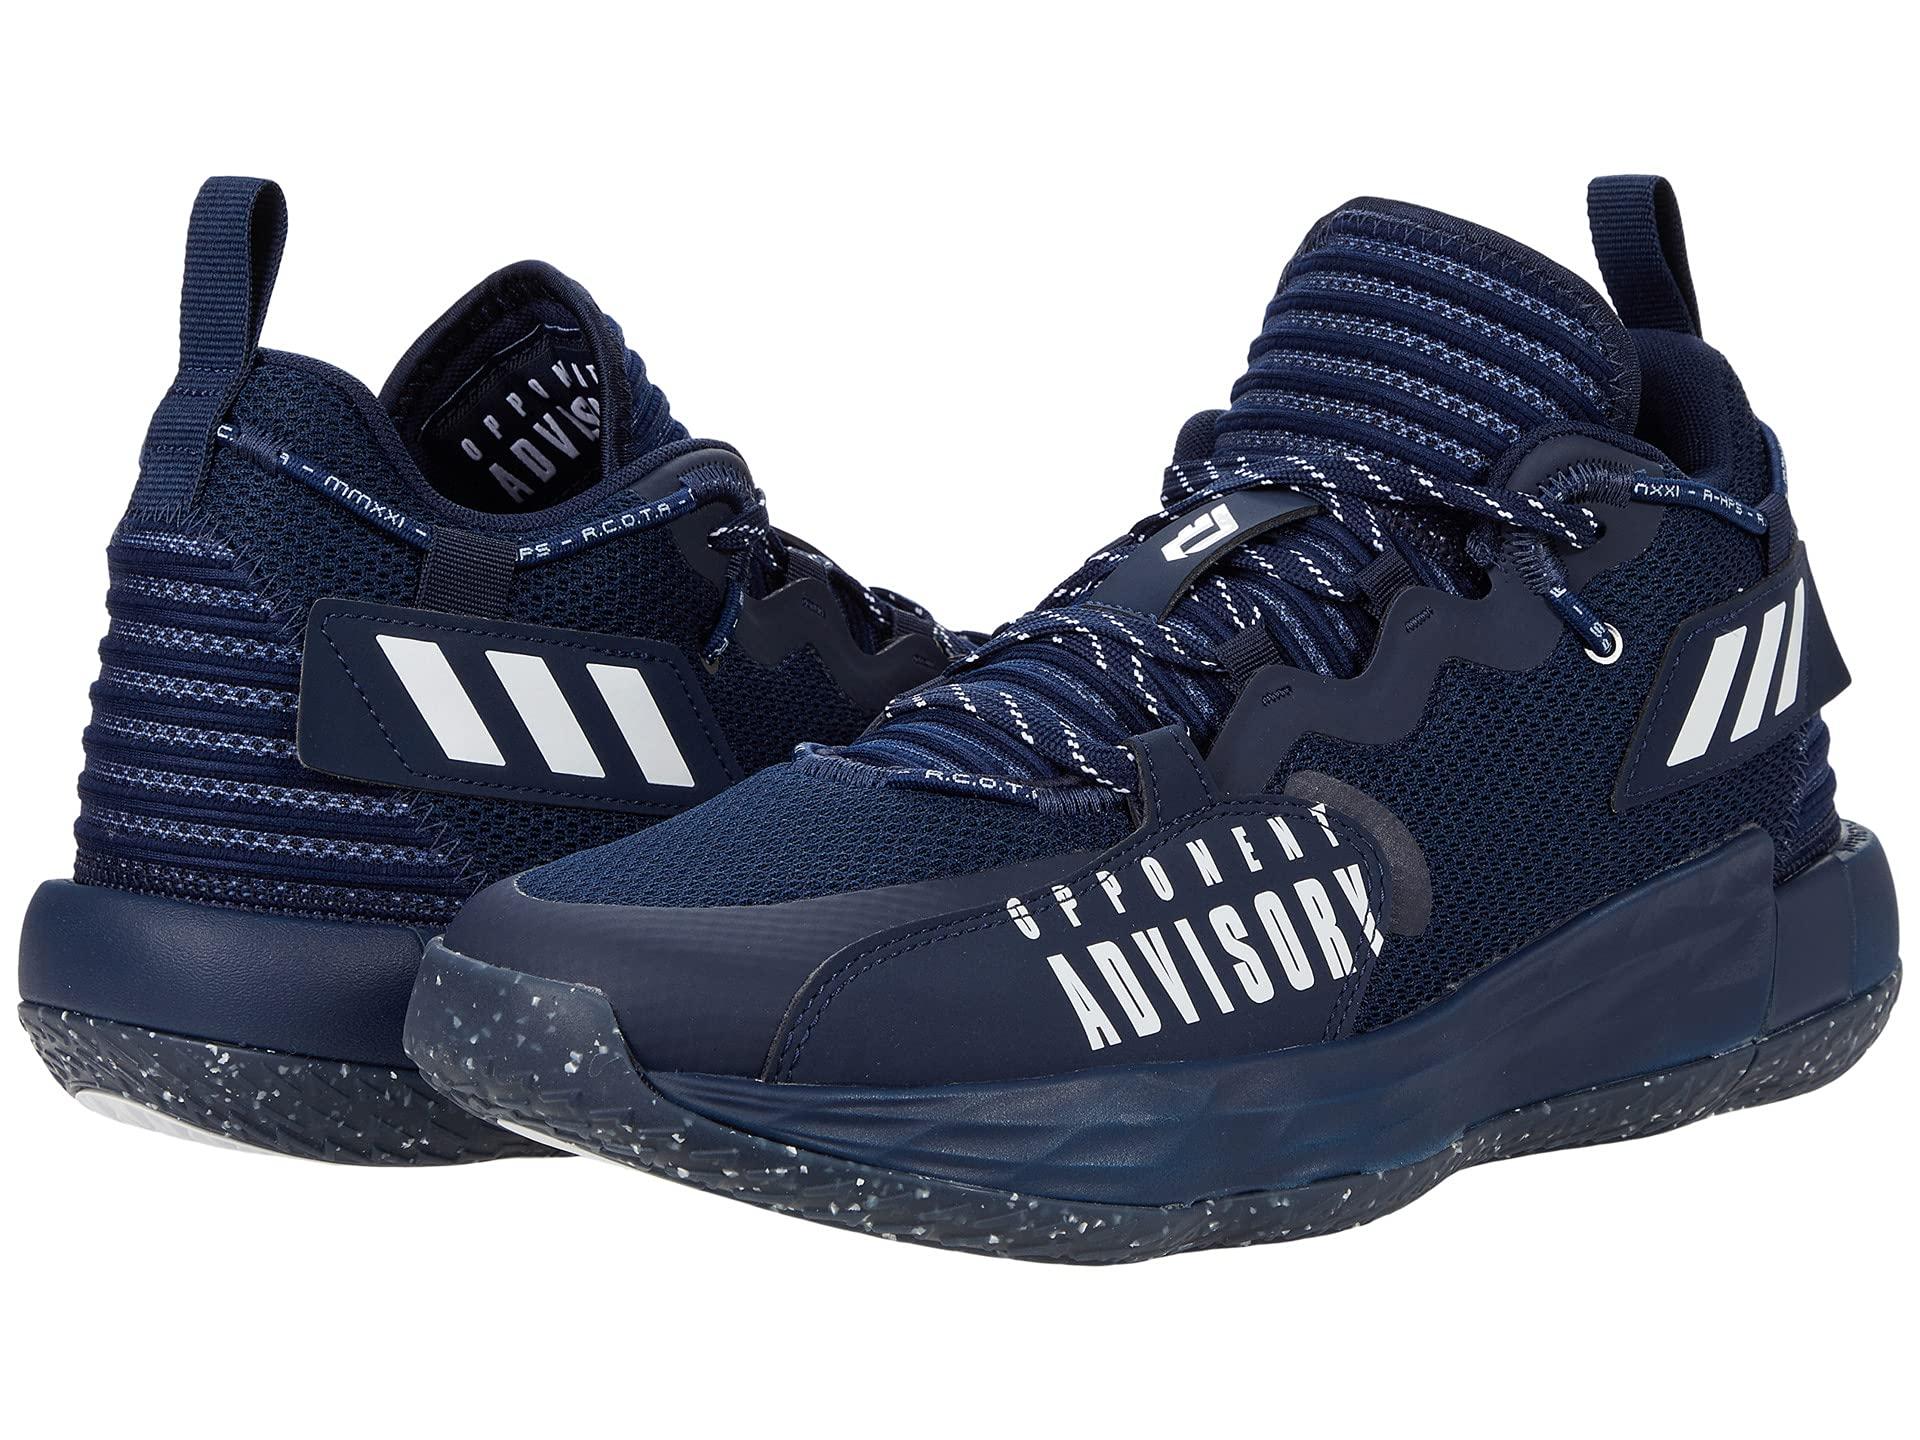 adidas Synthetic Dame 7 Extended Play Basketball Shoes in Navy (Blue) - Lyst